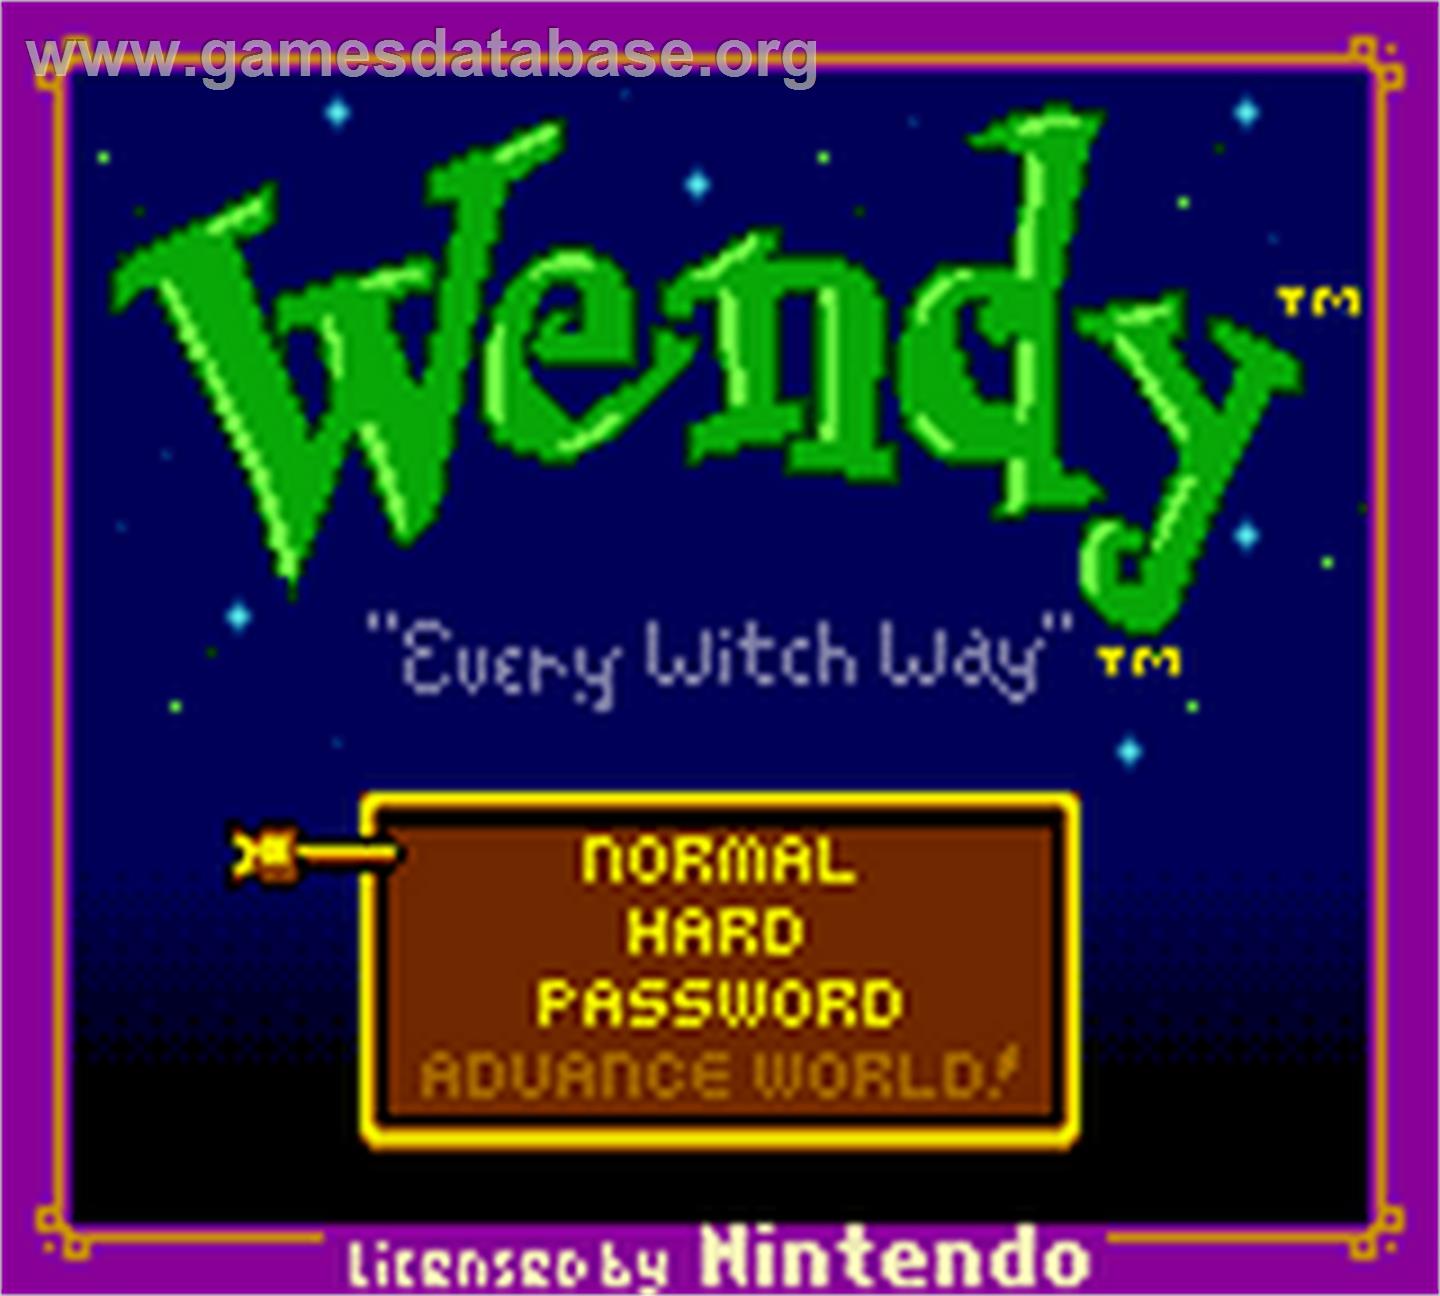 Wendy: Every Witch Way - Nintendo Game Boy Color - Artwork - Title Screen